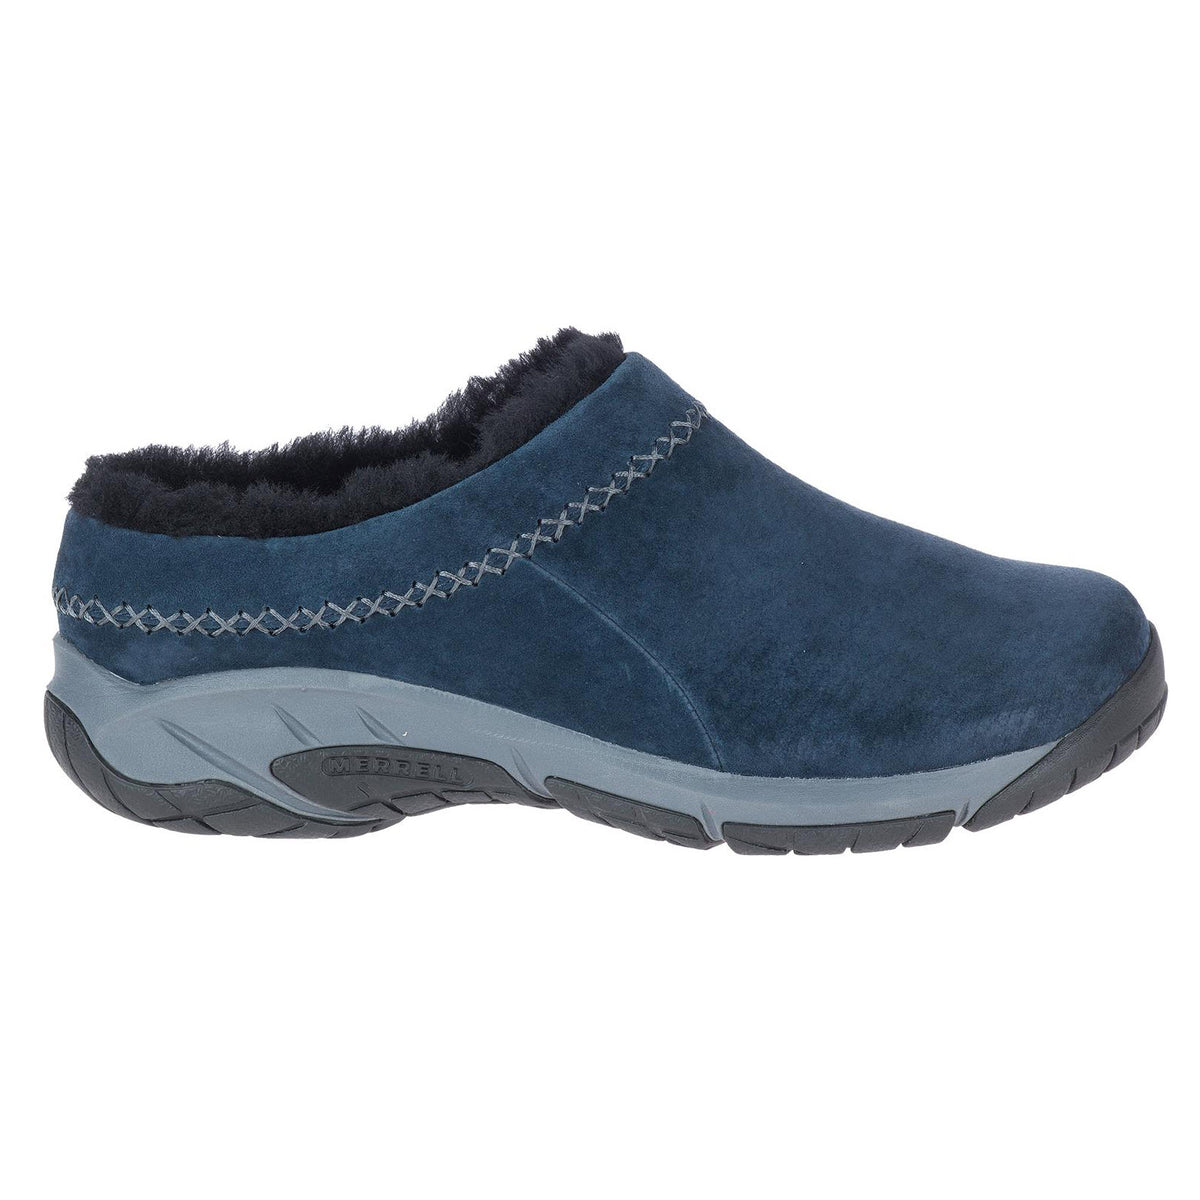 Merrell blue suede slip-on shoe with black fur lining and a rubber sole.